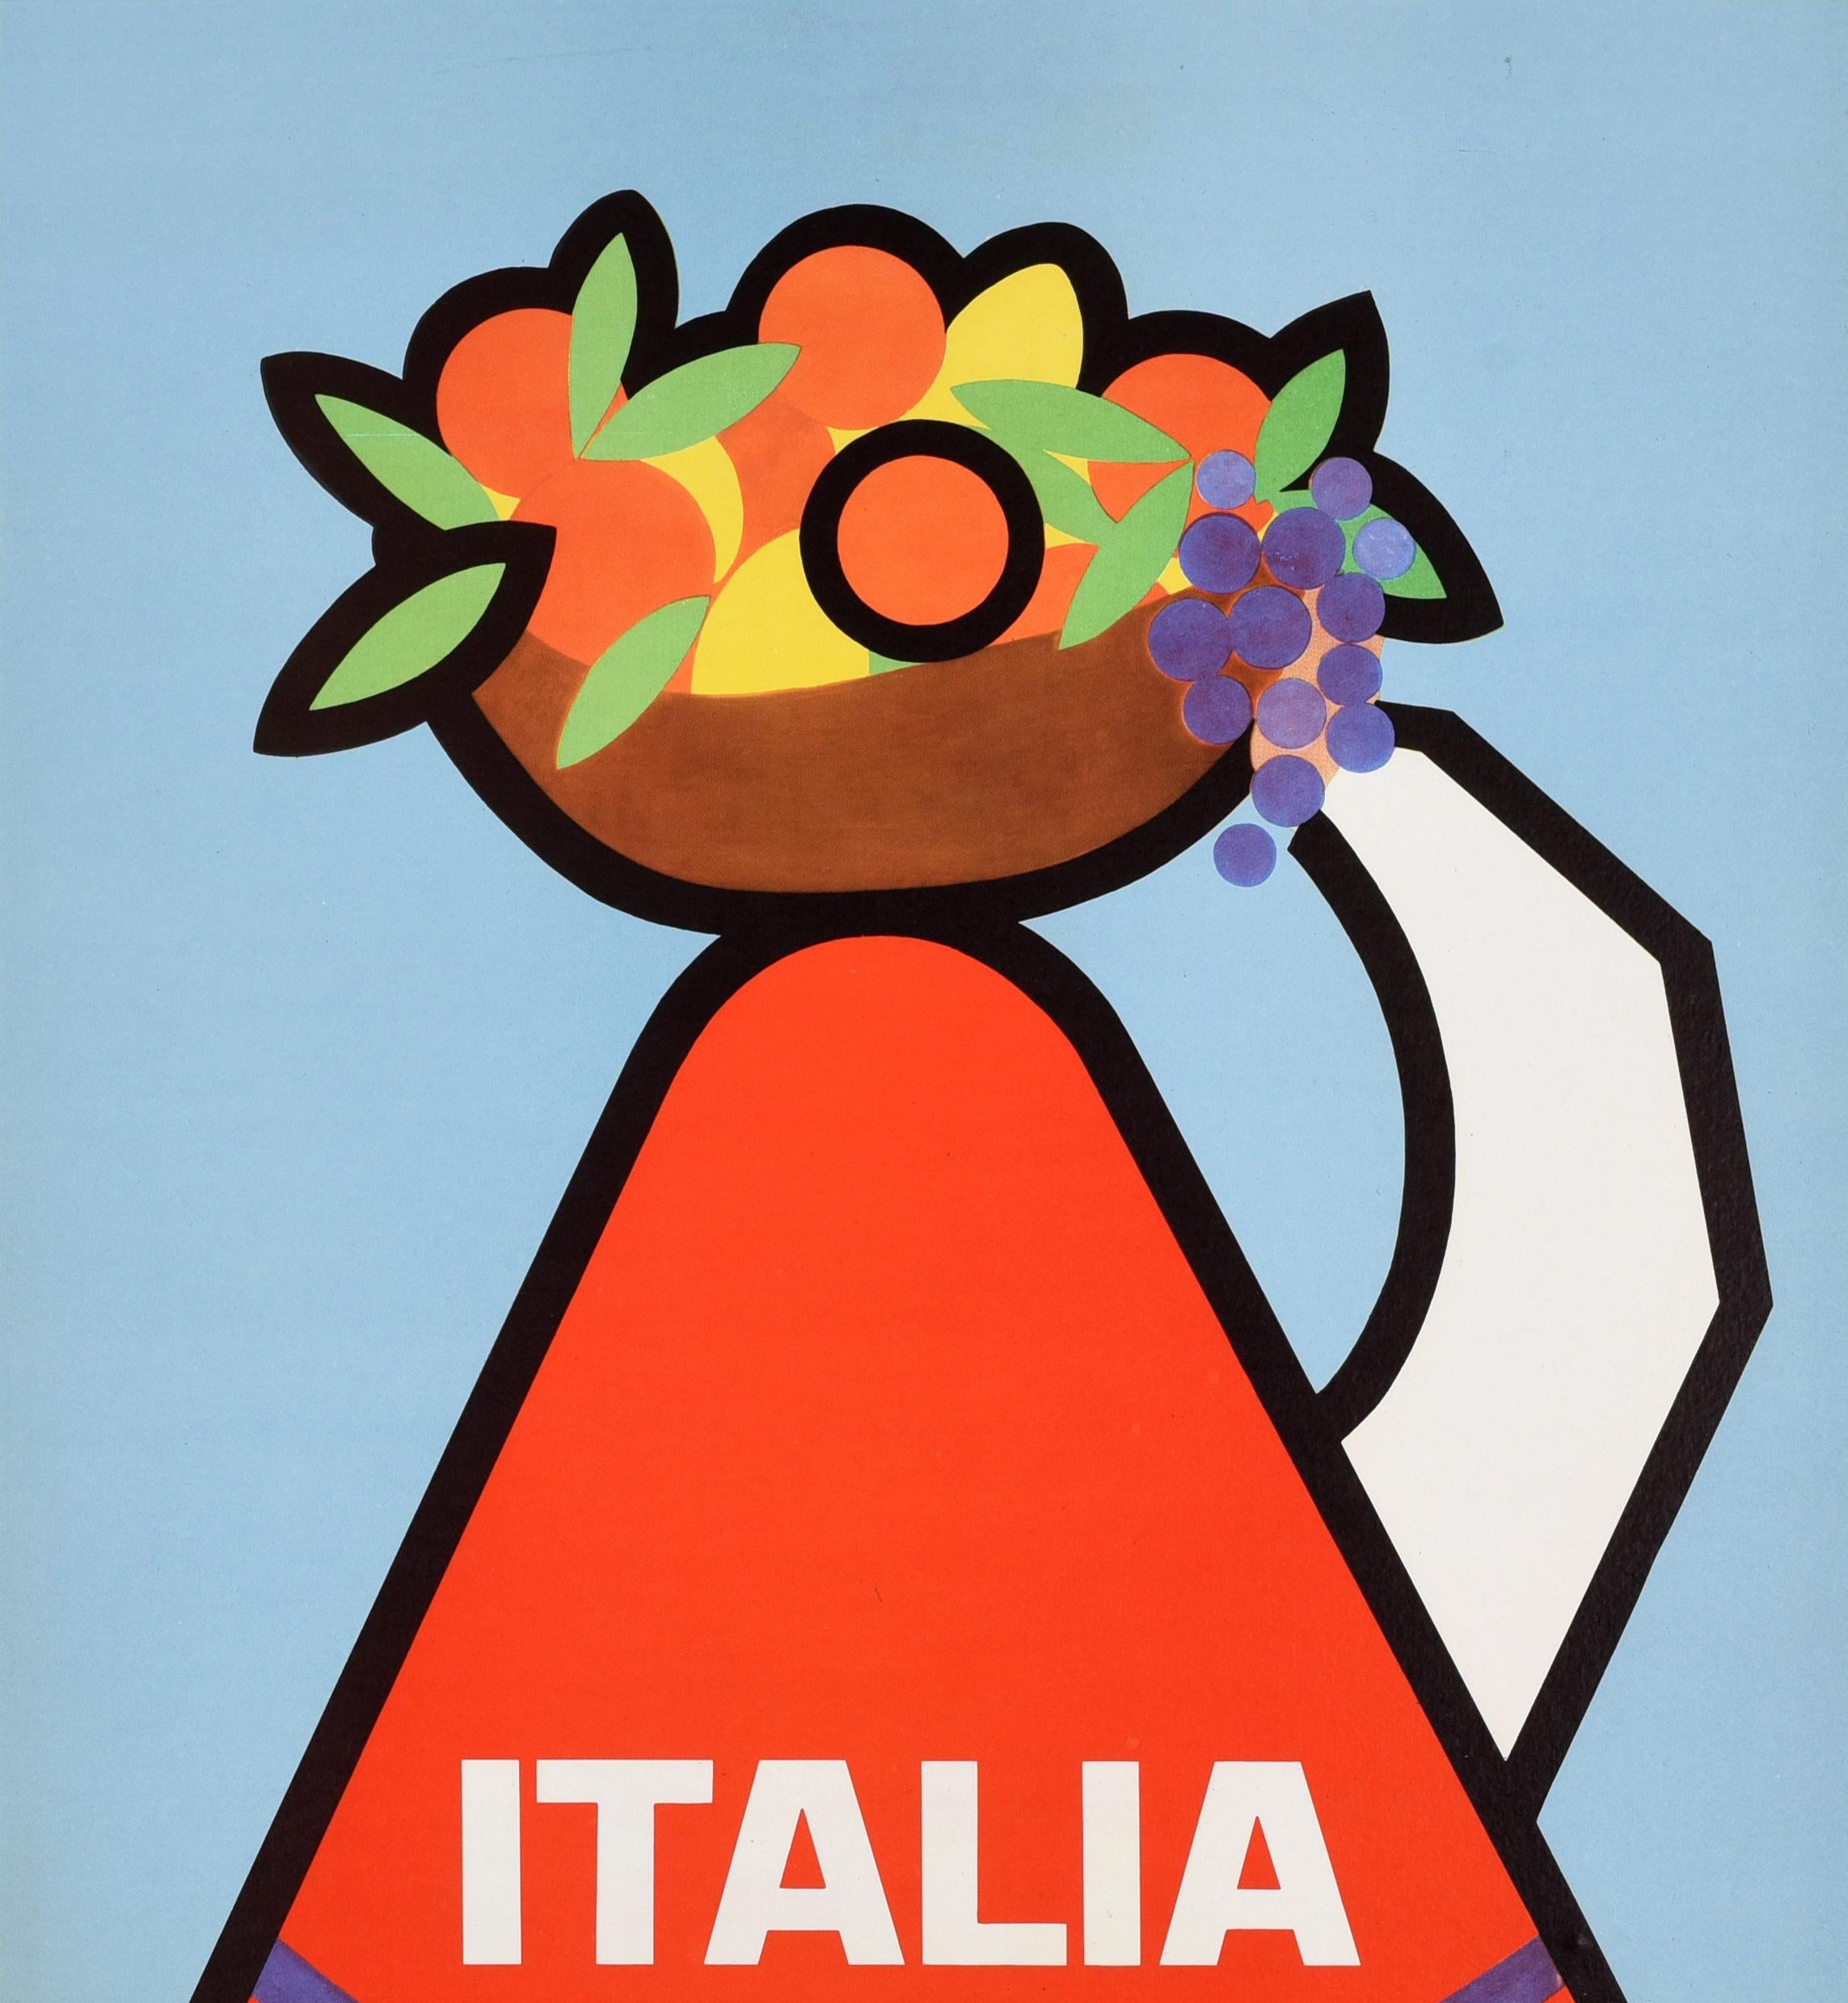 Original Vintage Travel Poster Italia Italy Fruit Midcentury Modern ENIT Design - Blue Print by Unknown